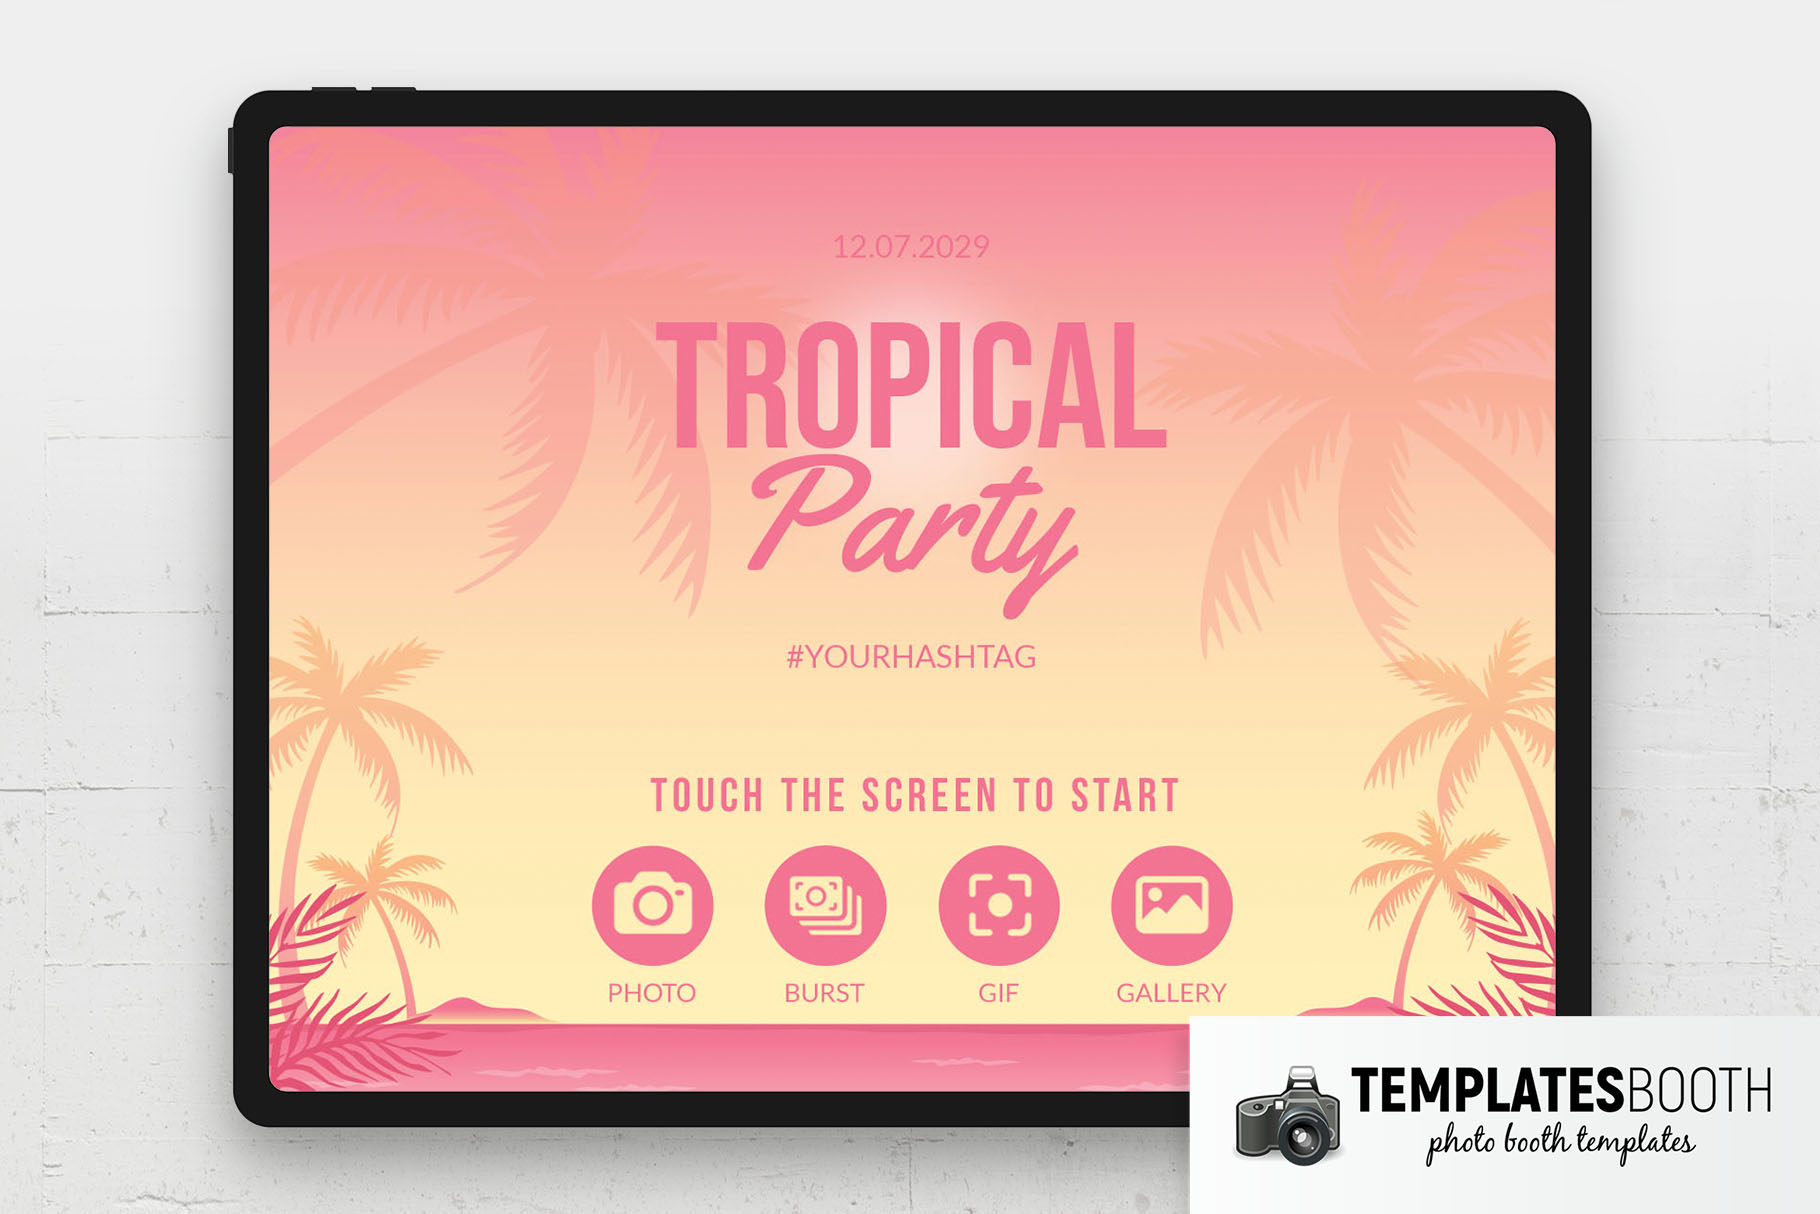 Tropical Party Photo Booth Welcome Screen